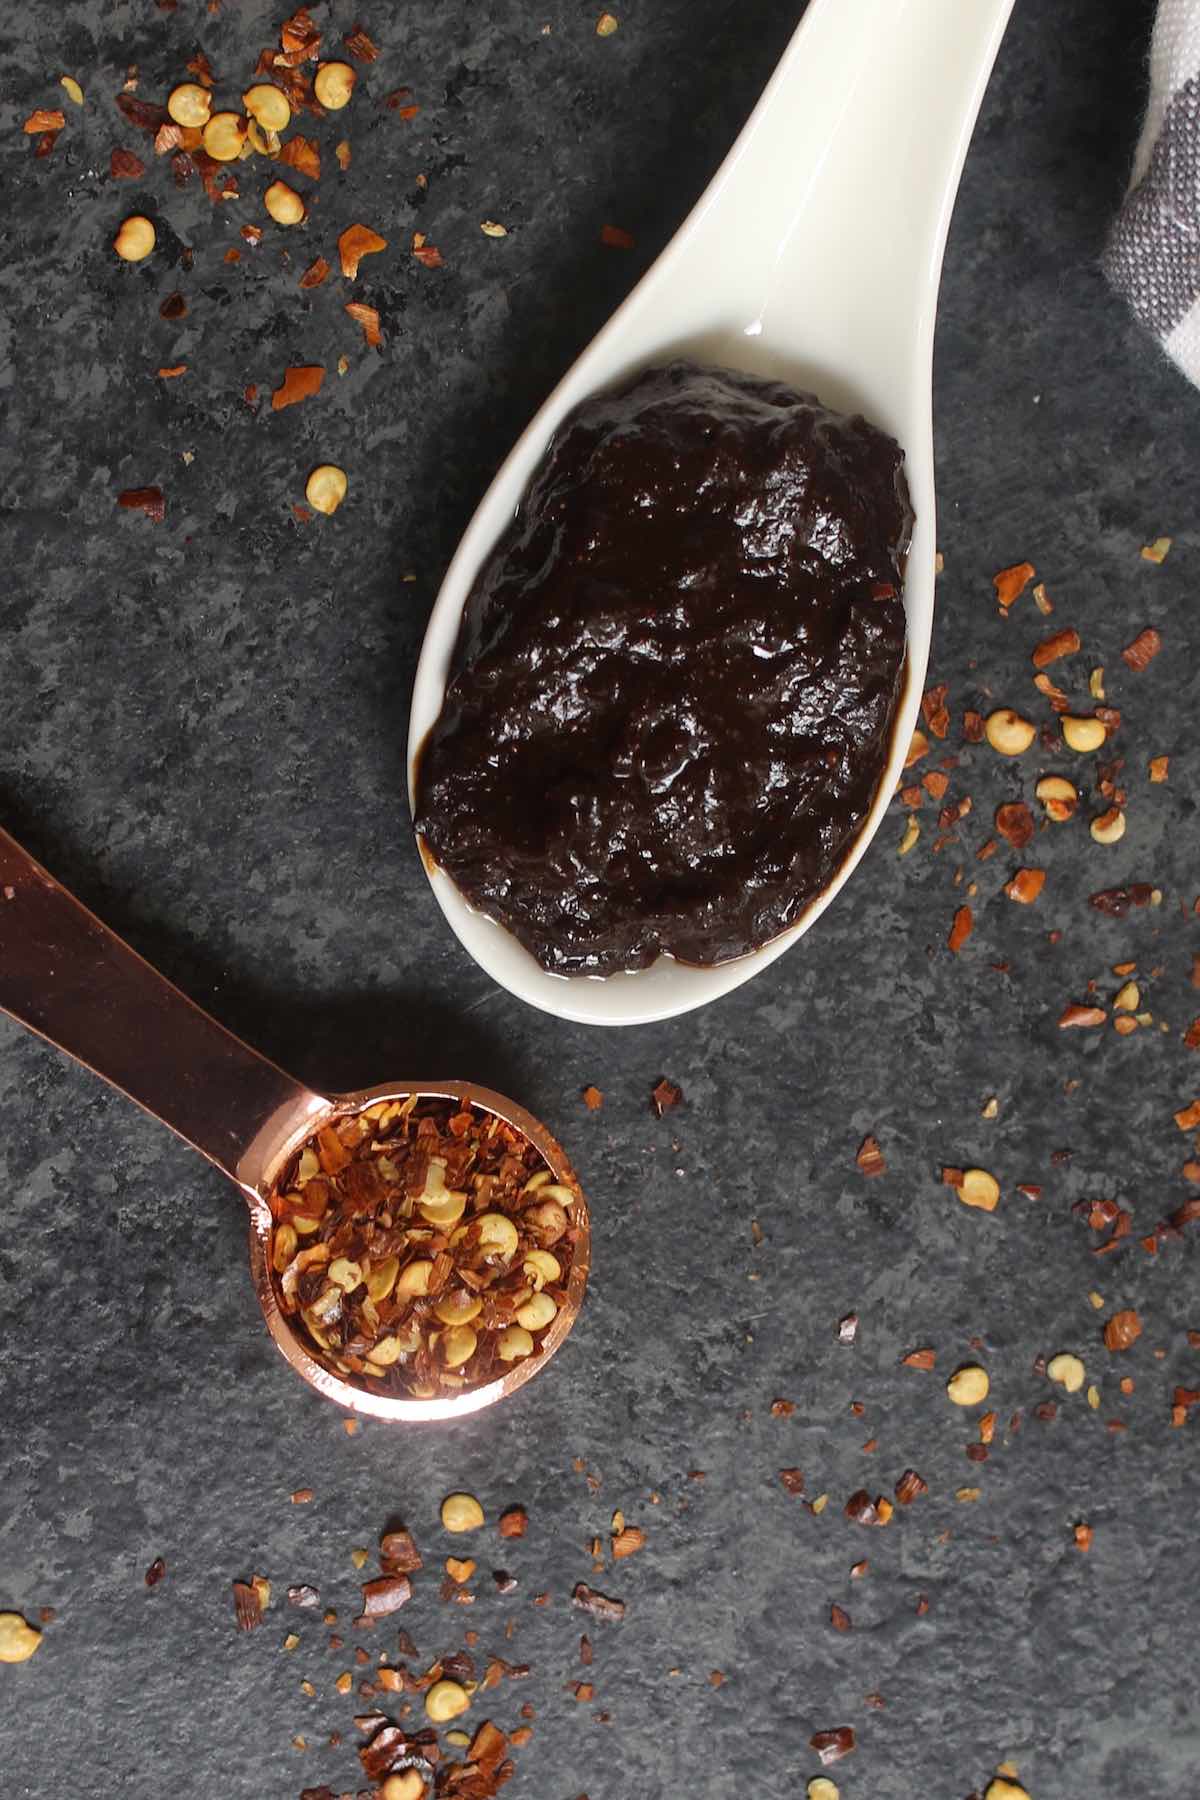 Doubanjiang substitute ingredients: regular black soybean paste and red chili flakes.